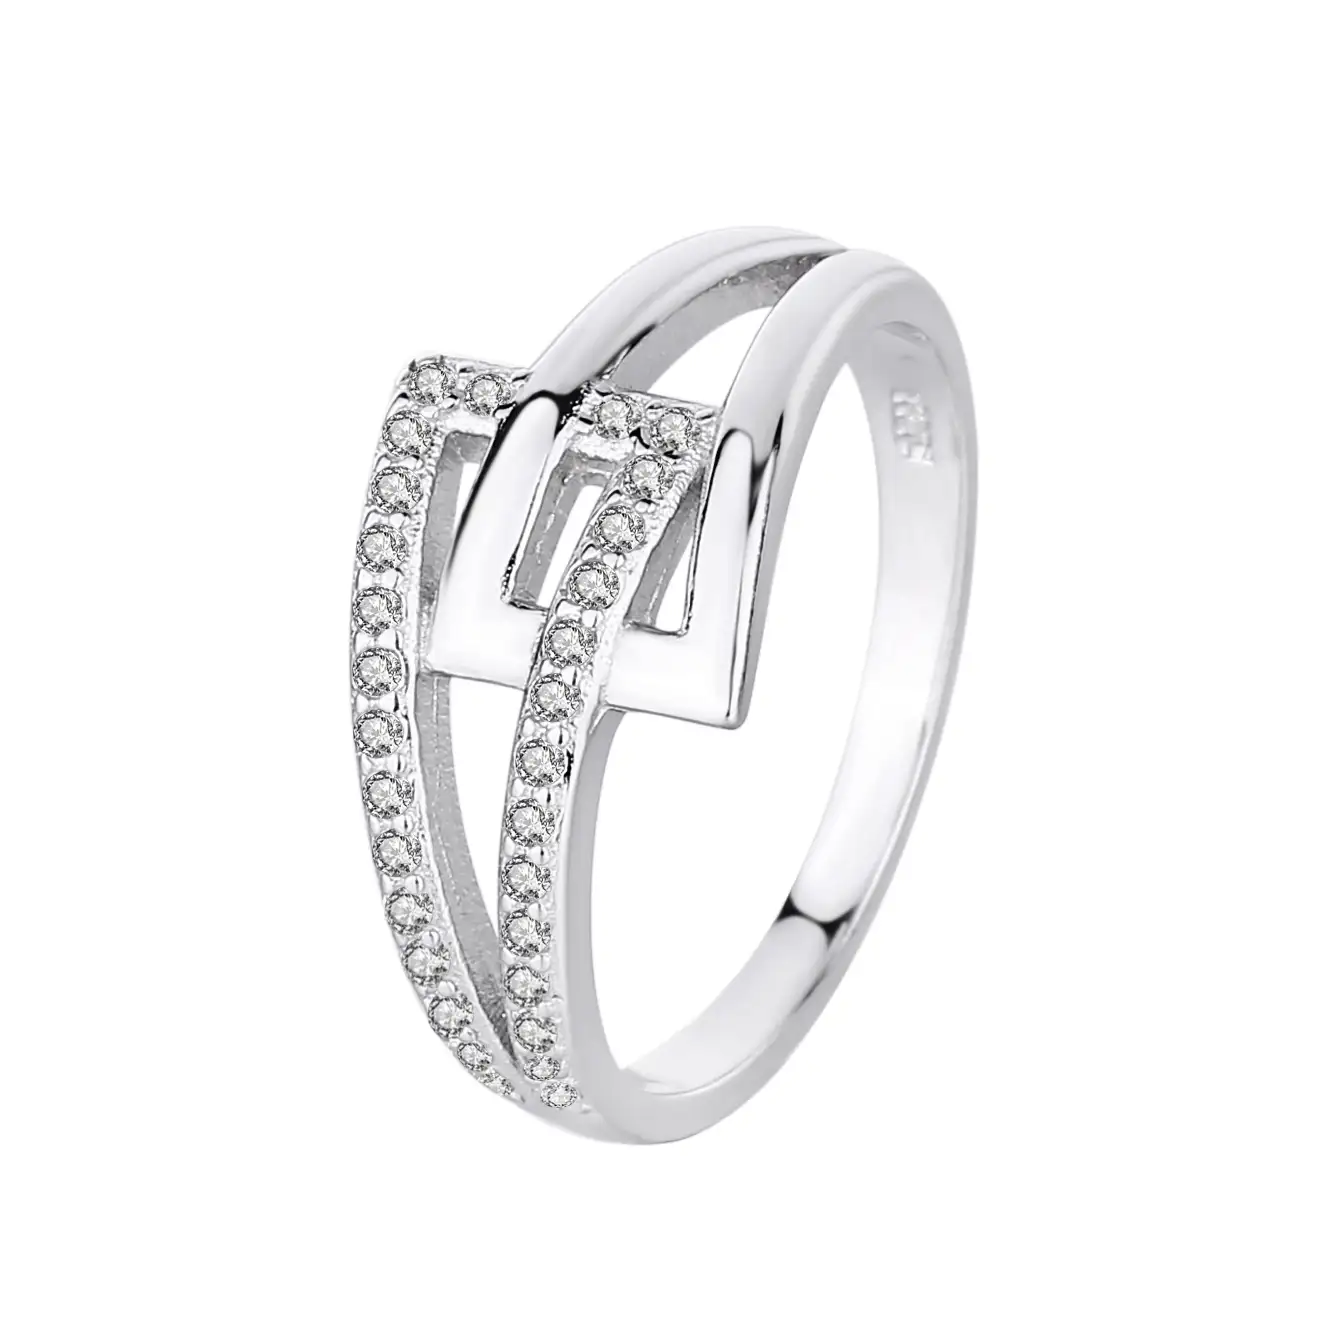 Silver Cubic Zirconia Belt Band Ring 70100014